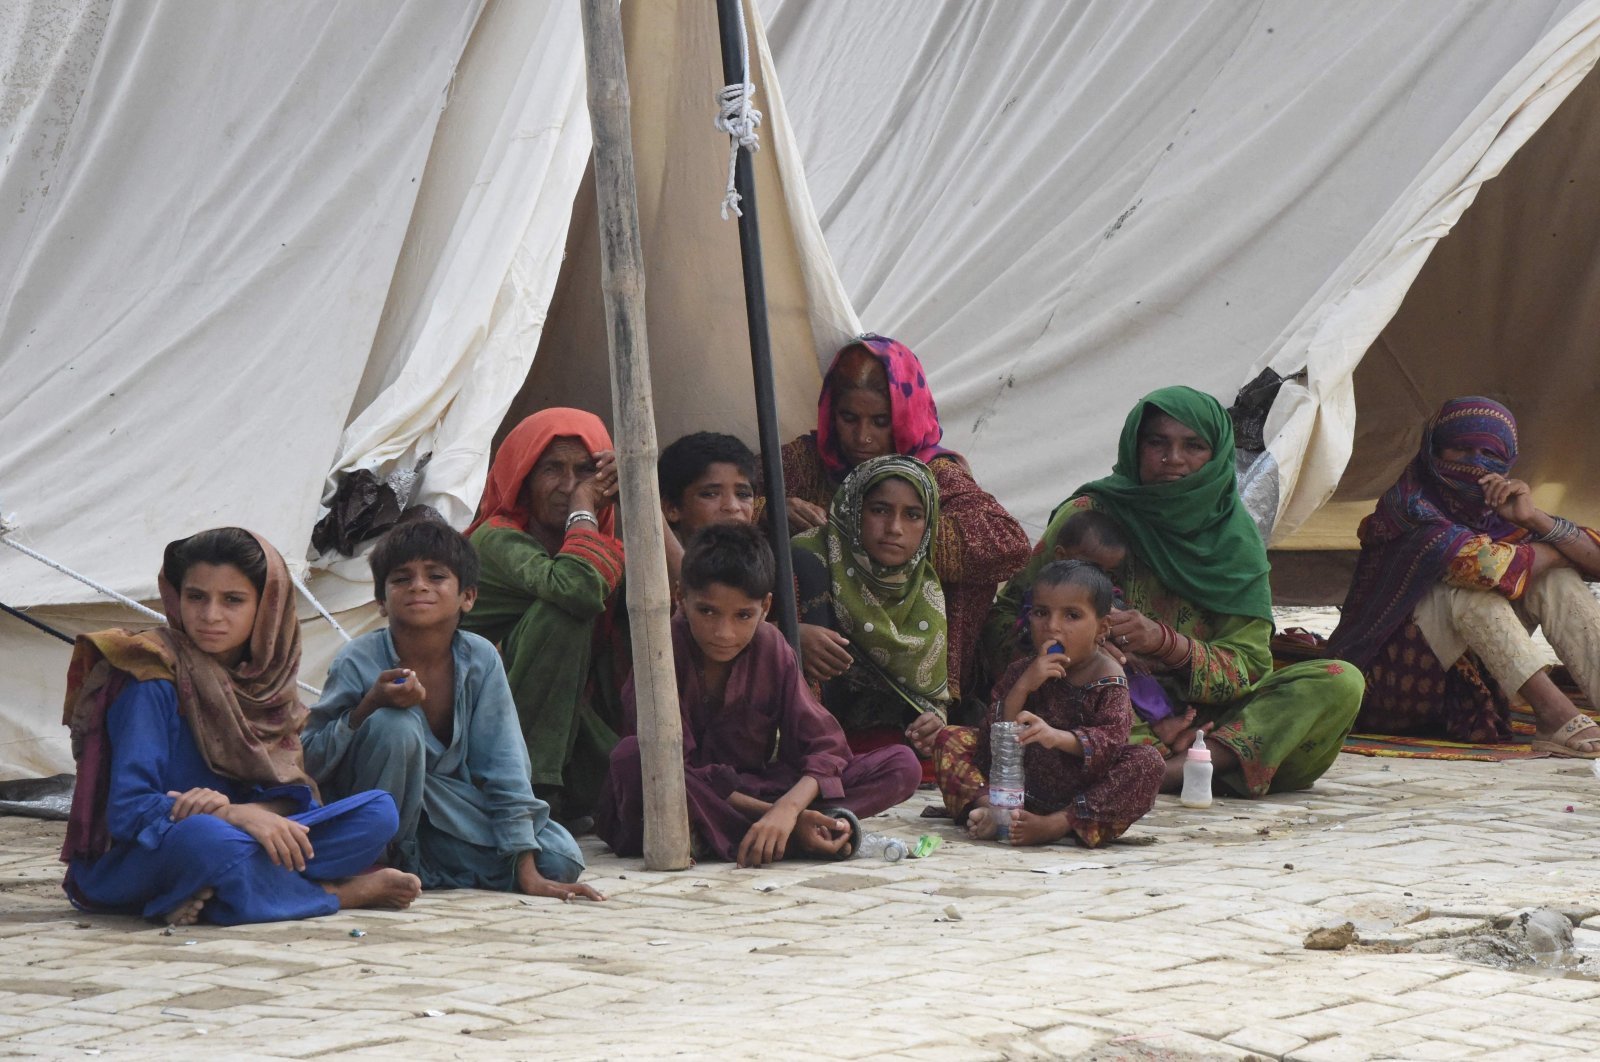 Flood-affected people sit in a tent at a makeshift camp after heavy monsoon rains in Jaffarabad district, Balochistan province, Pakistan, Sept. 3, 2022. (AFP Photo)